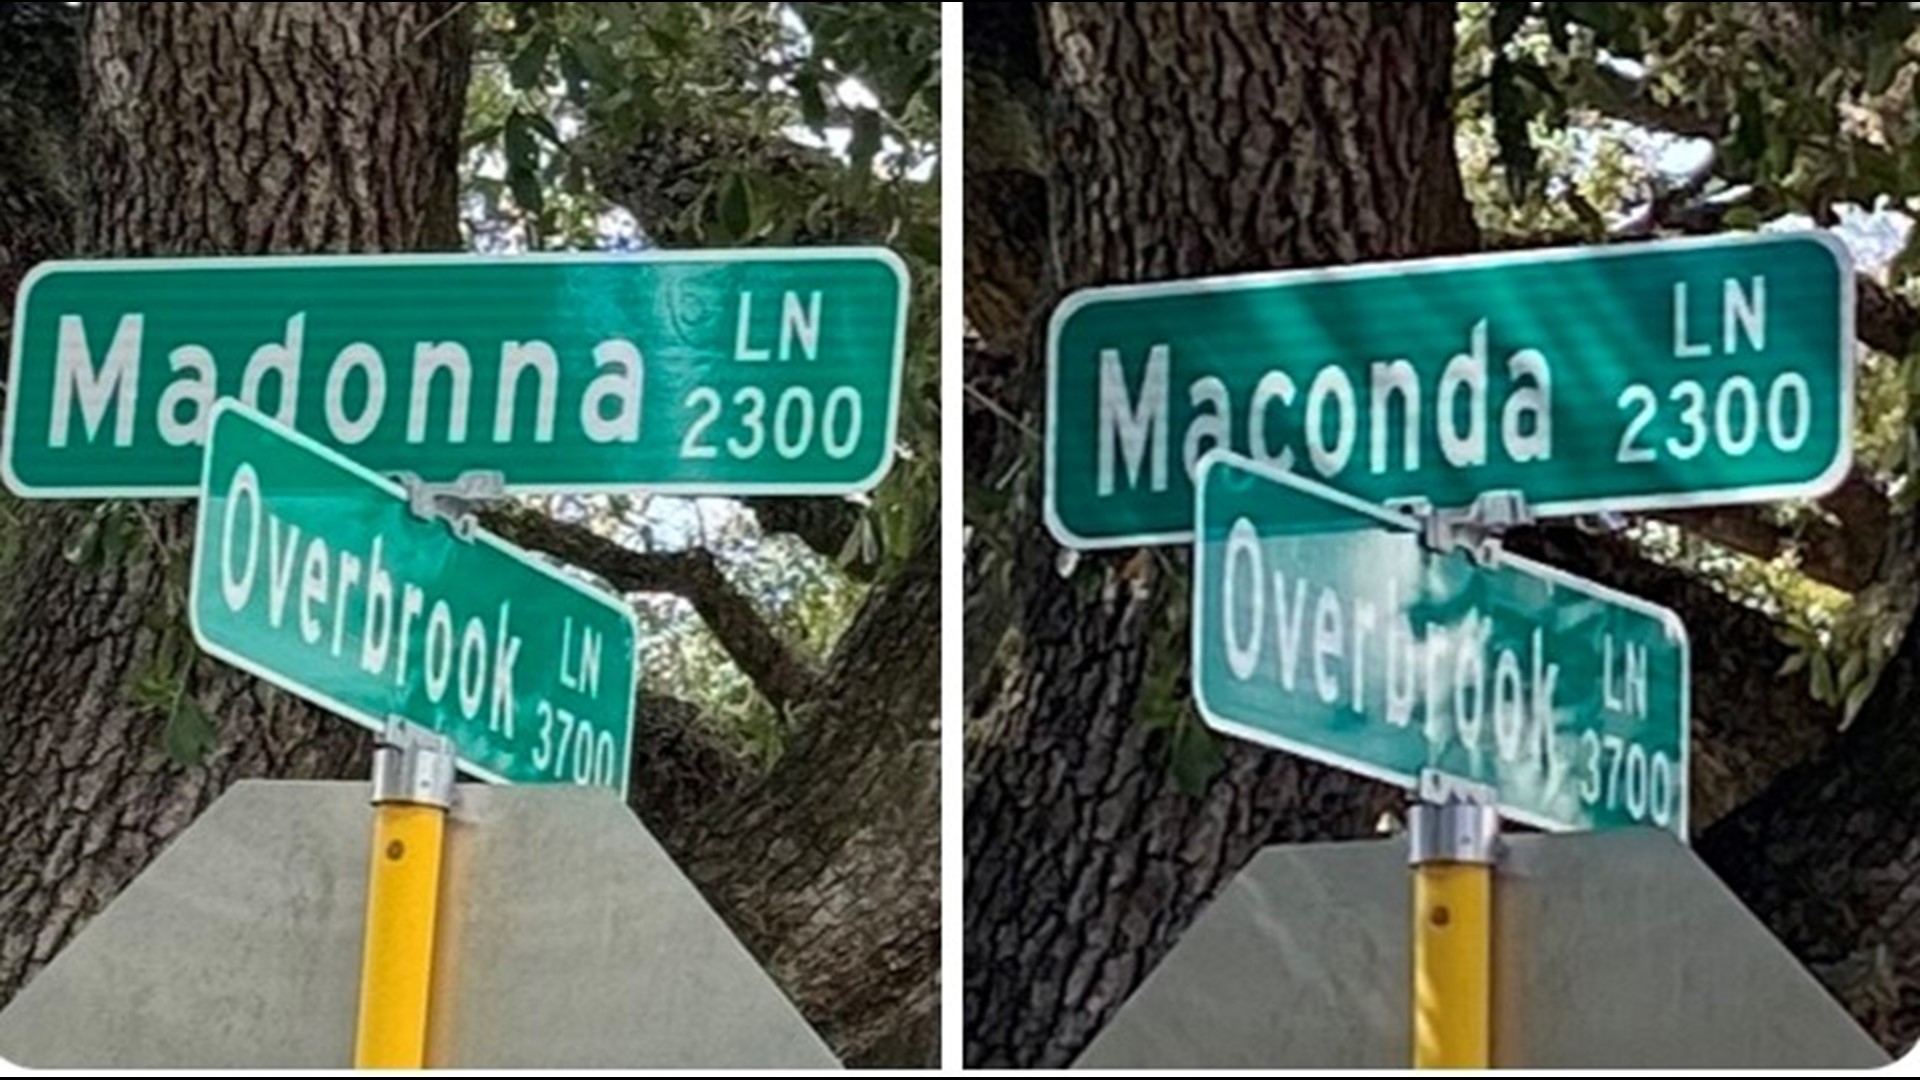 "Maconda" became "Madonna" because of a faded work order, according to City Council Member Sallie Alcorn.